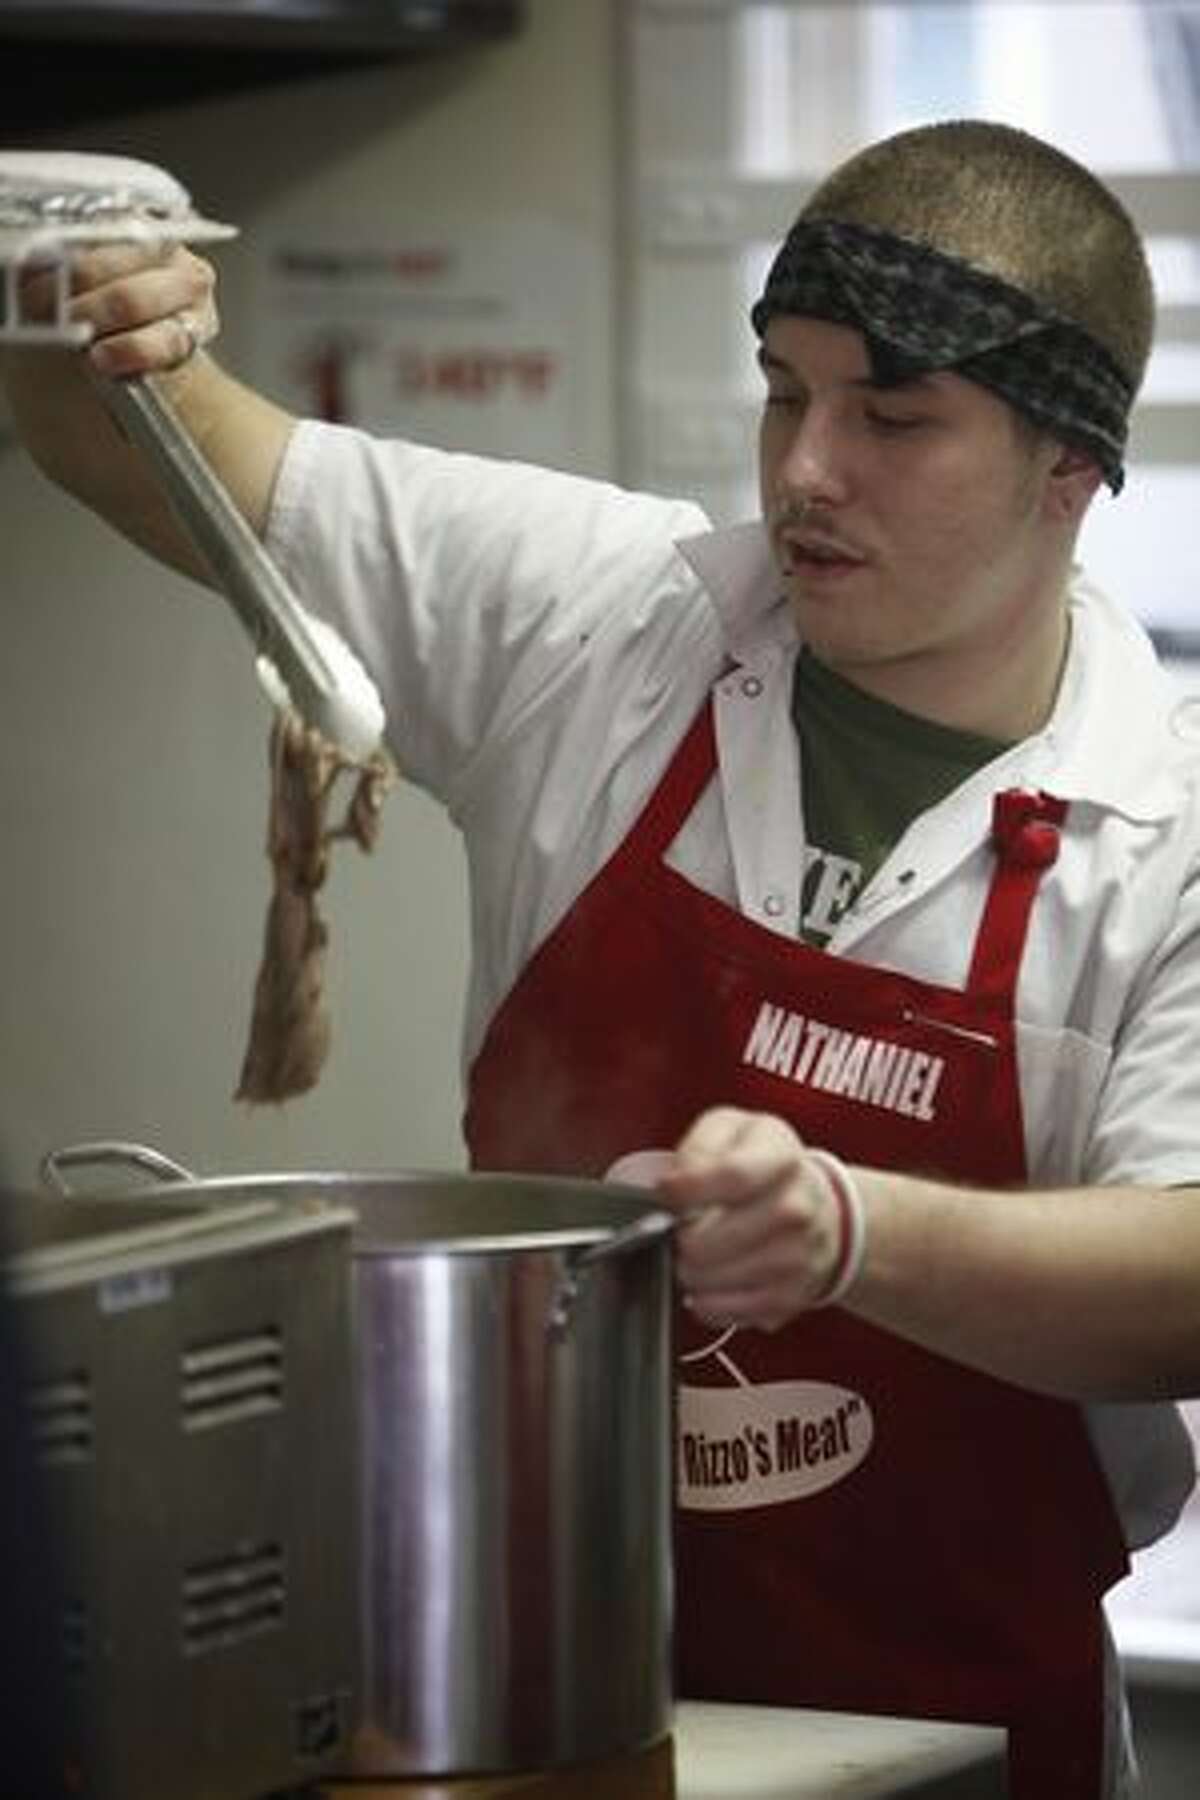 Nathan Grier prepares meat for french dips. Grier had been homeless since he was 17 until 10 months ago when Rizzo hired him to do odd jobs. He has since found a place to live and has worked as a cook at Rizzo's French Dip since it opened five months ago.